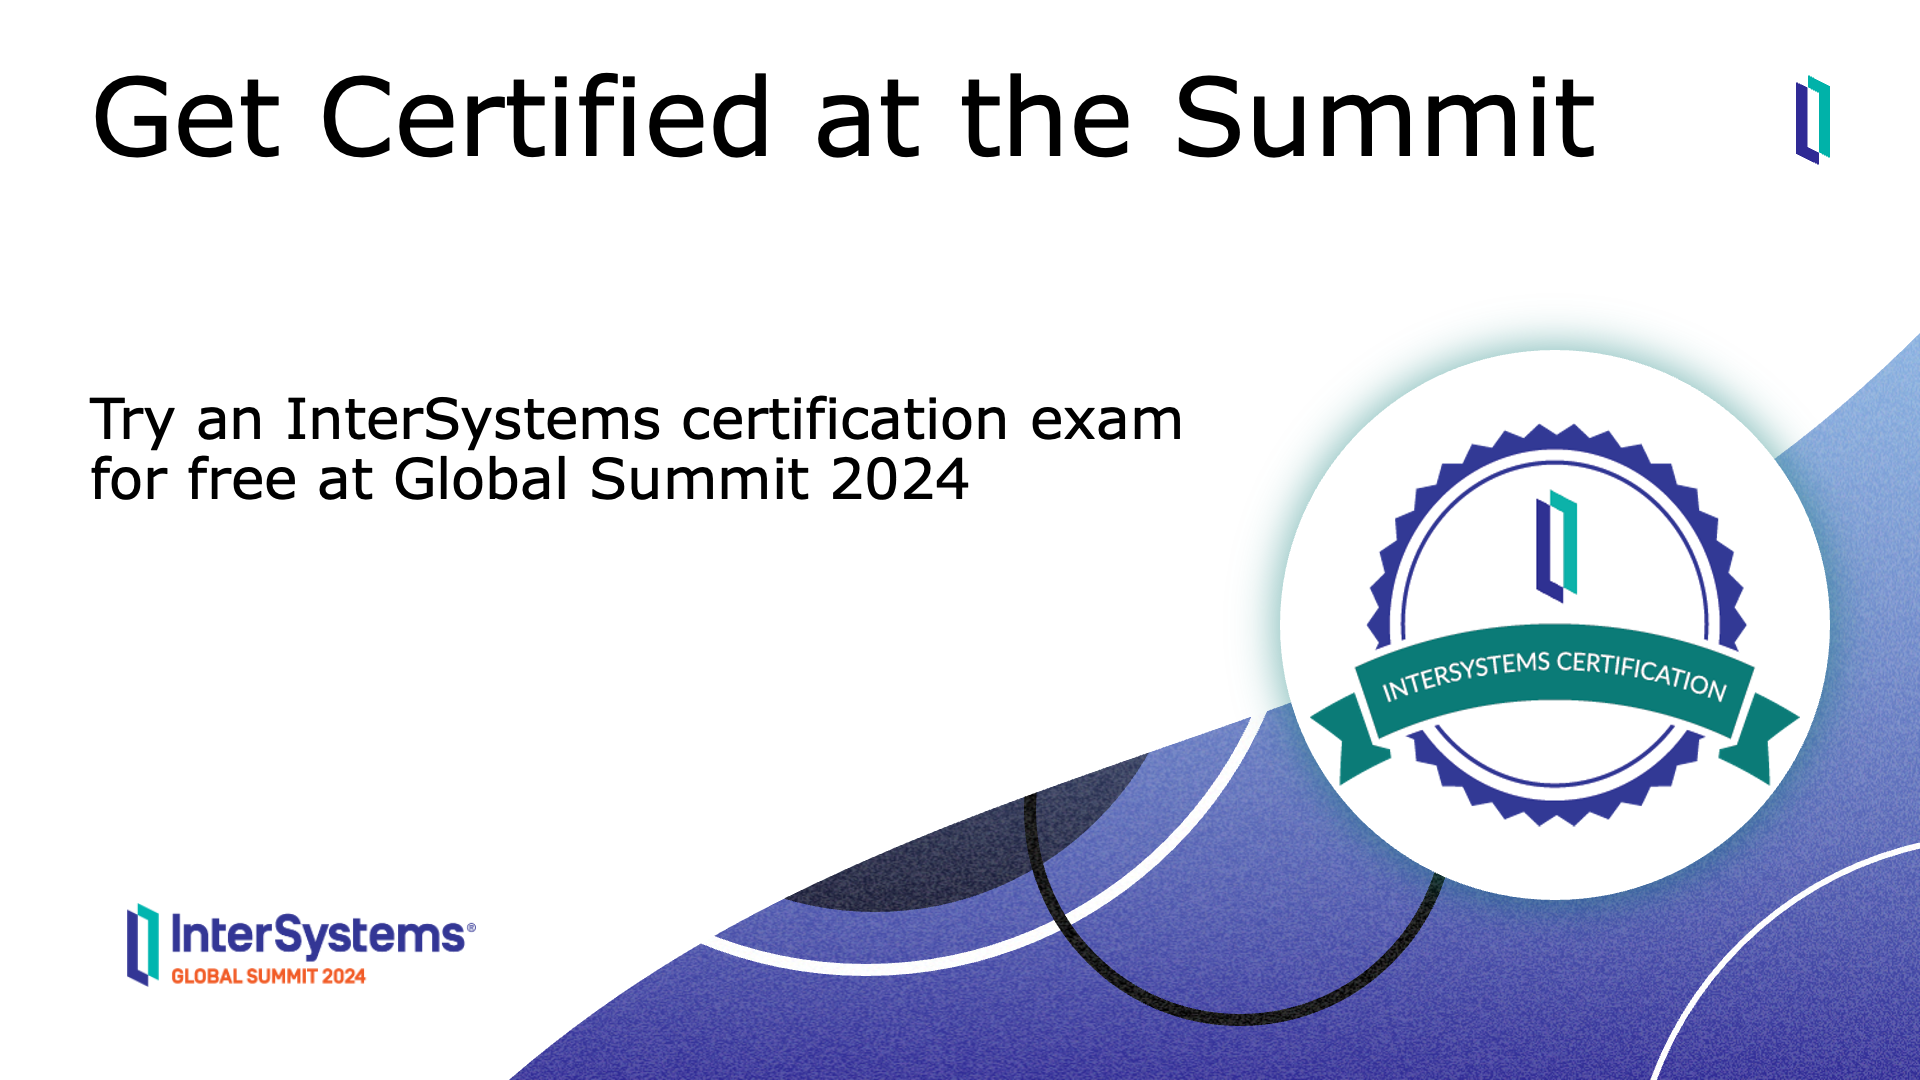 Try an InterSystems certification exam for free at Global Summit 2024.